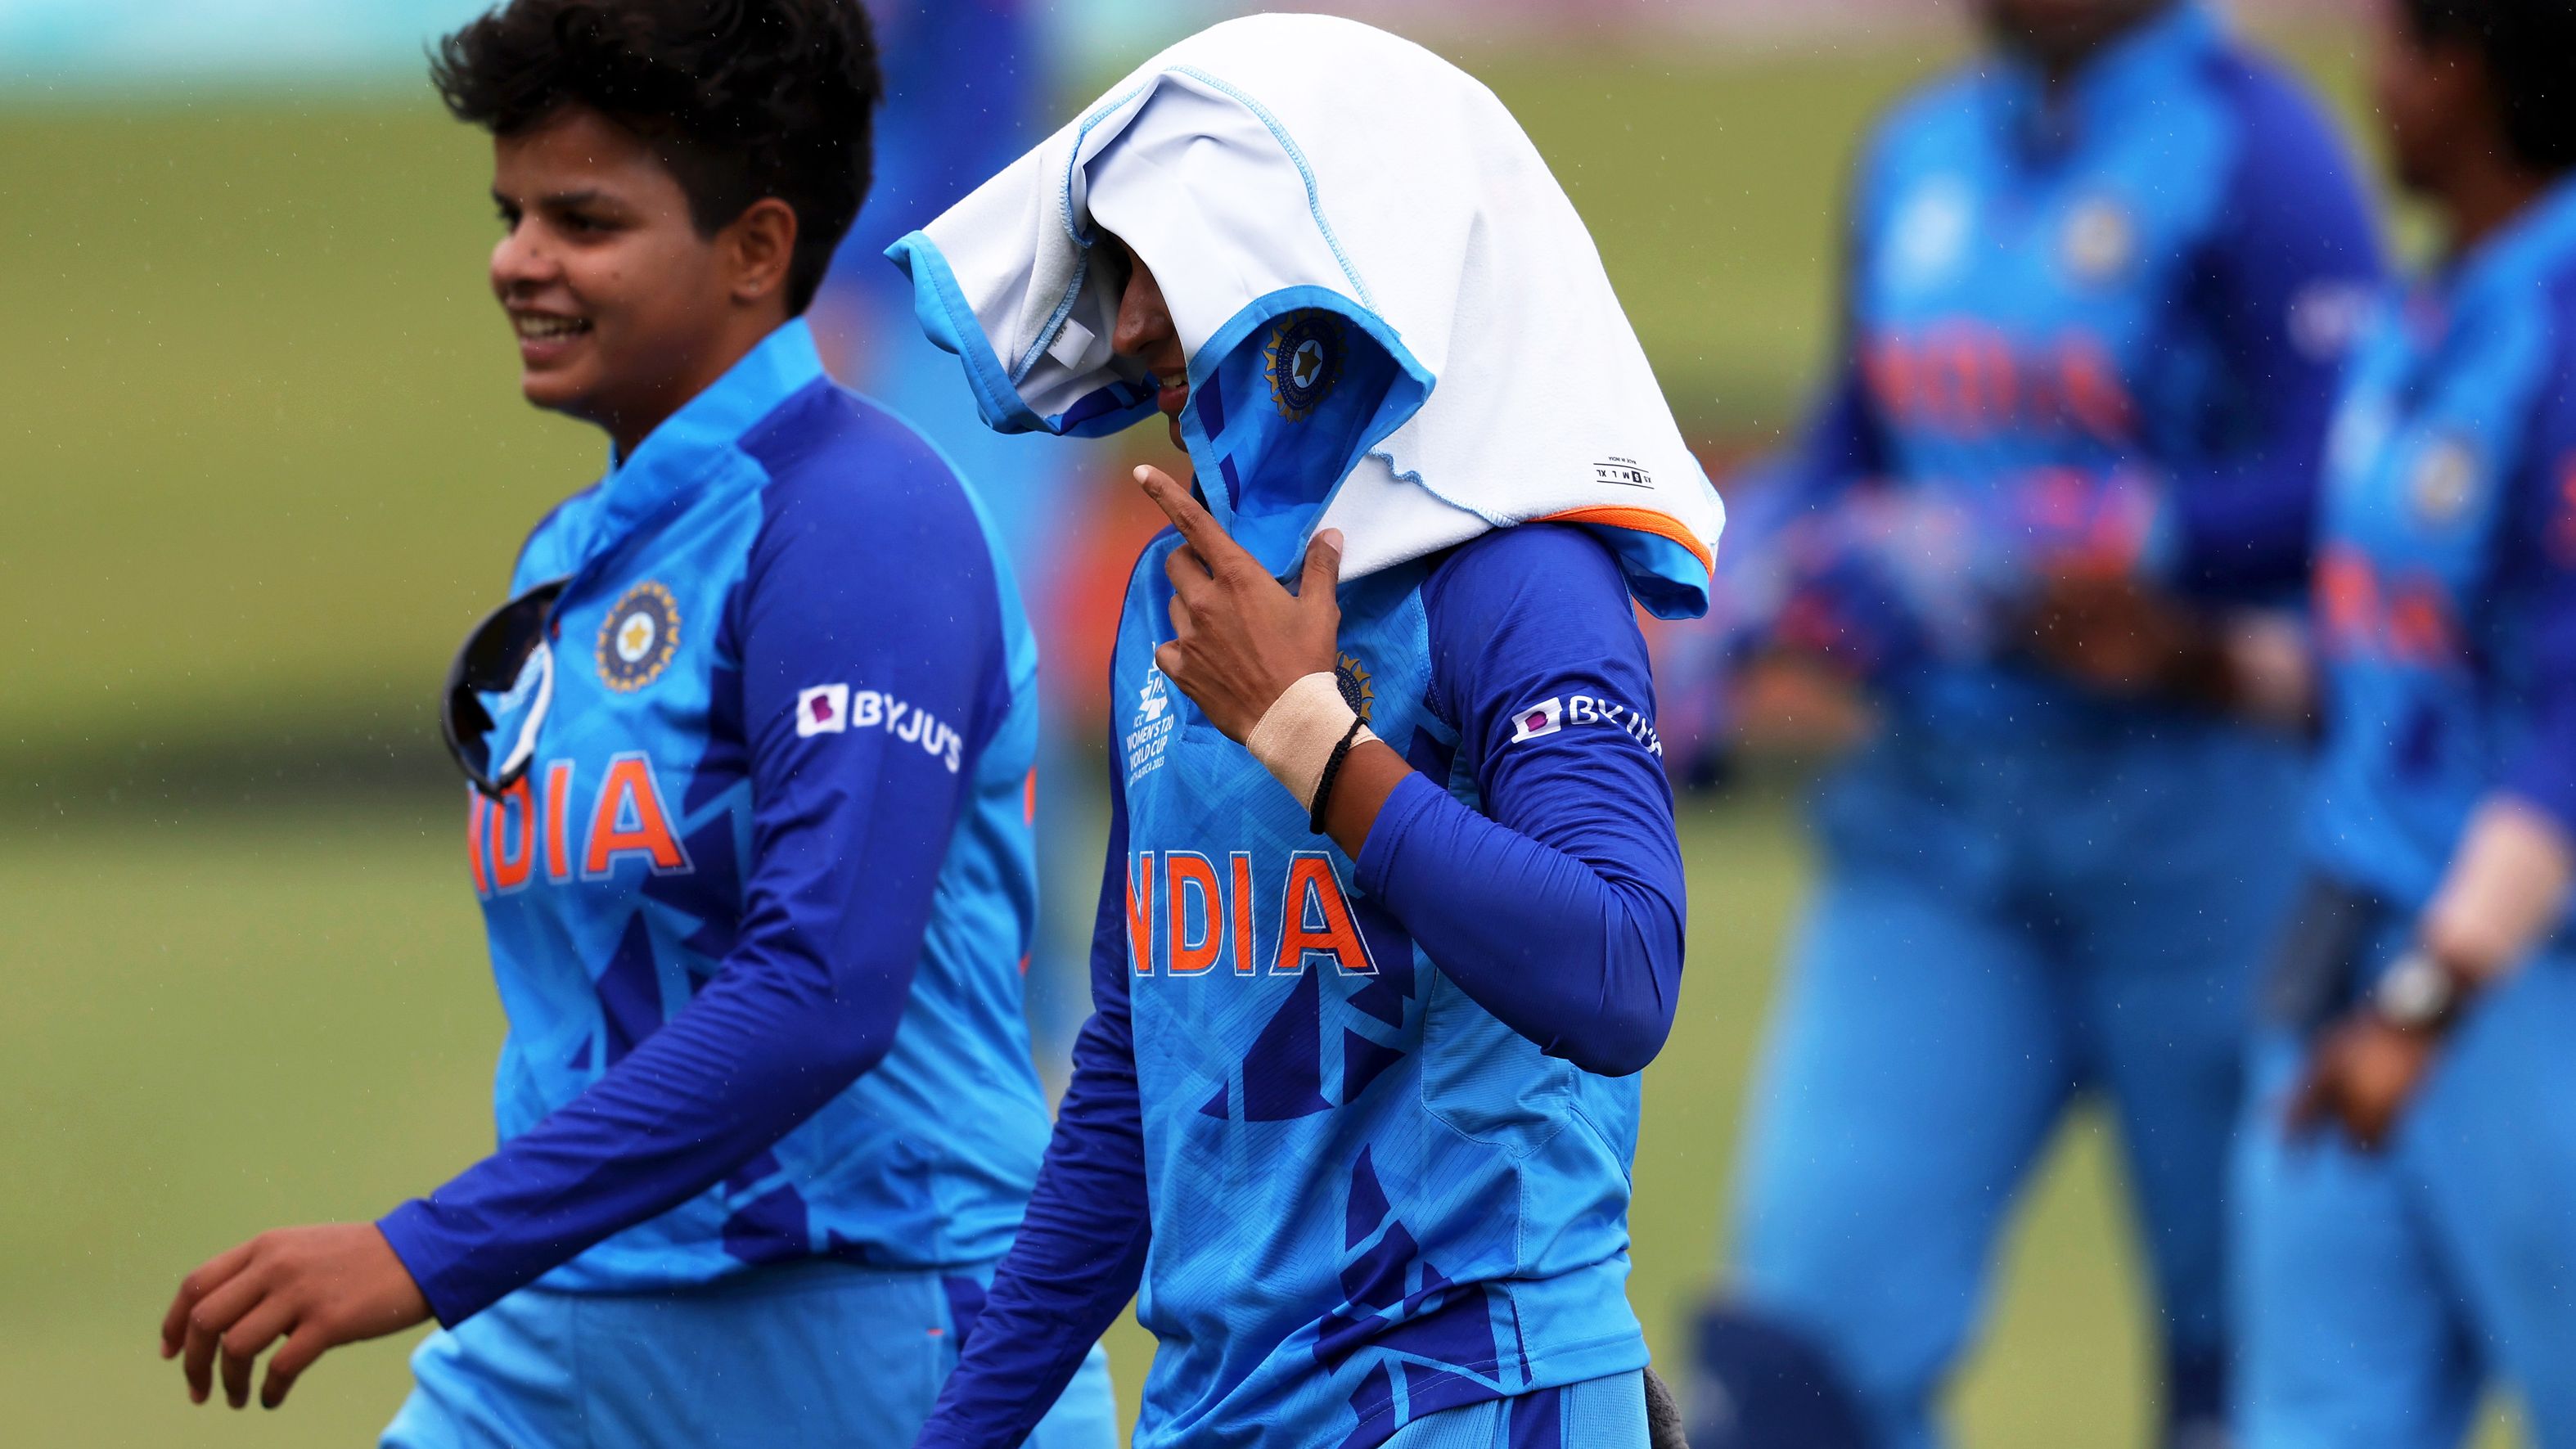 Harmanpreet Kaur leaves the field as rain delays play during the ICC Women's T20 World Cup group B match between India and Ireland.